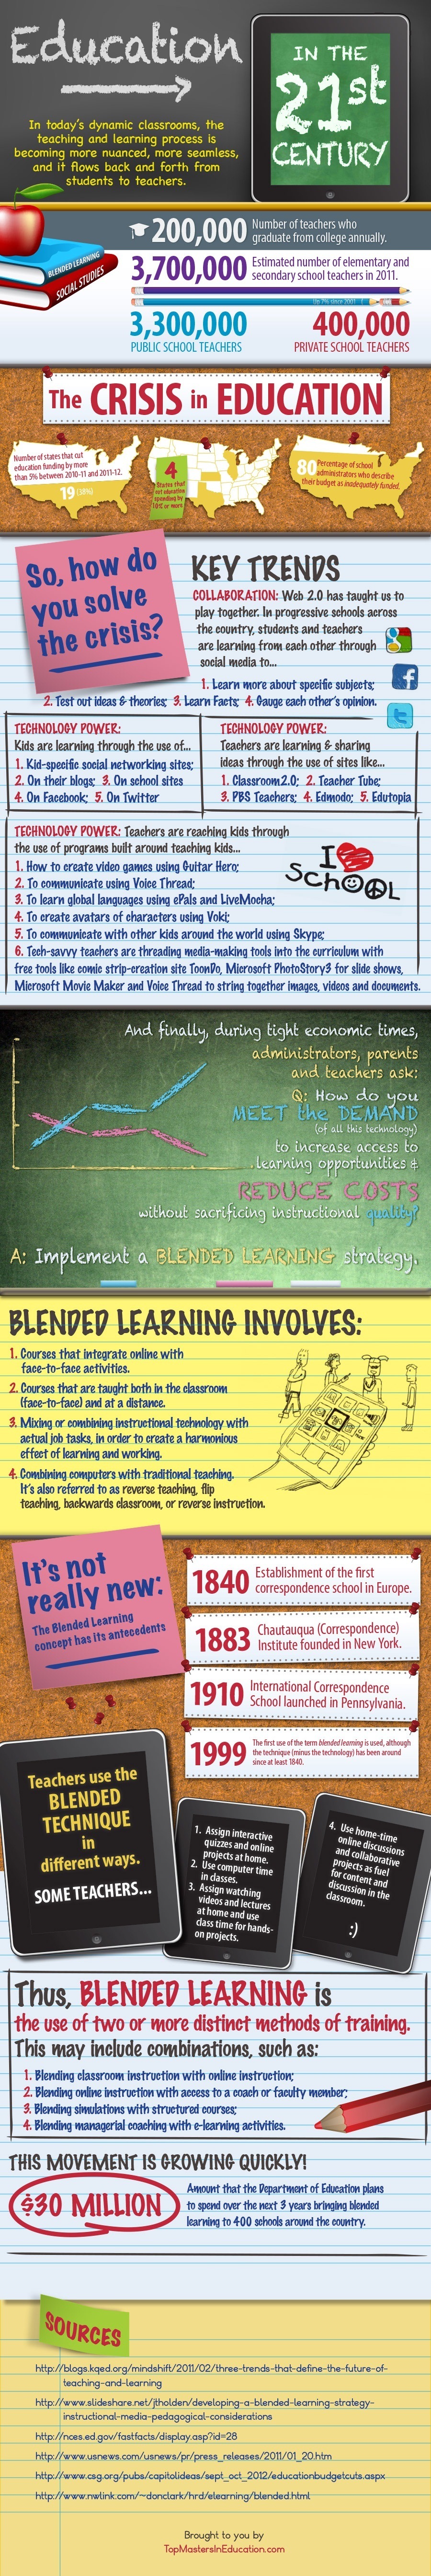 Education In the 21st century Infographic